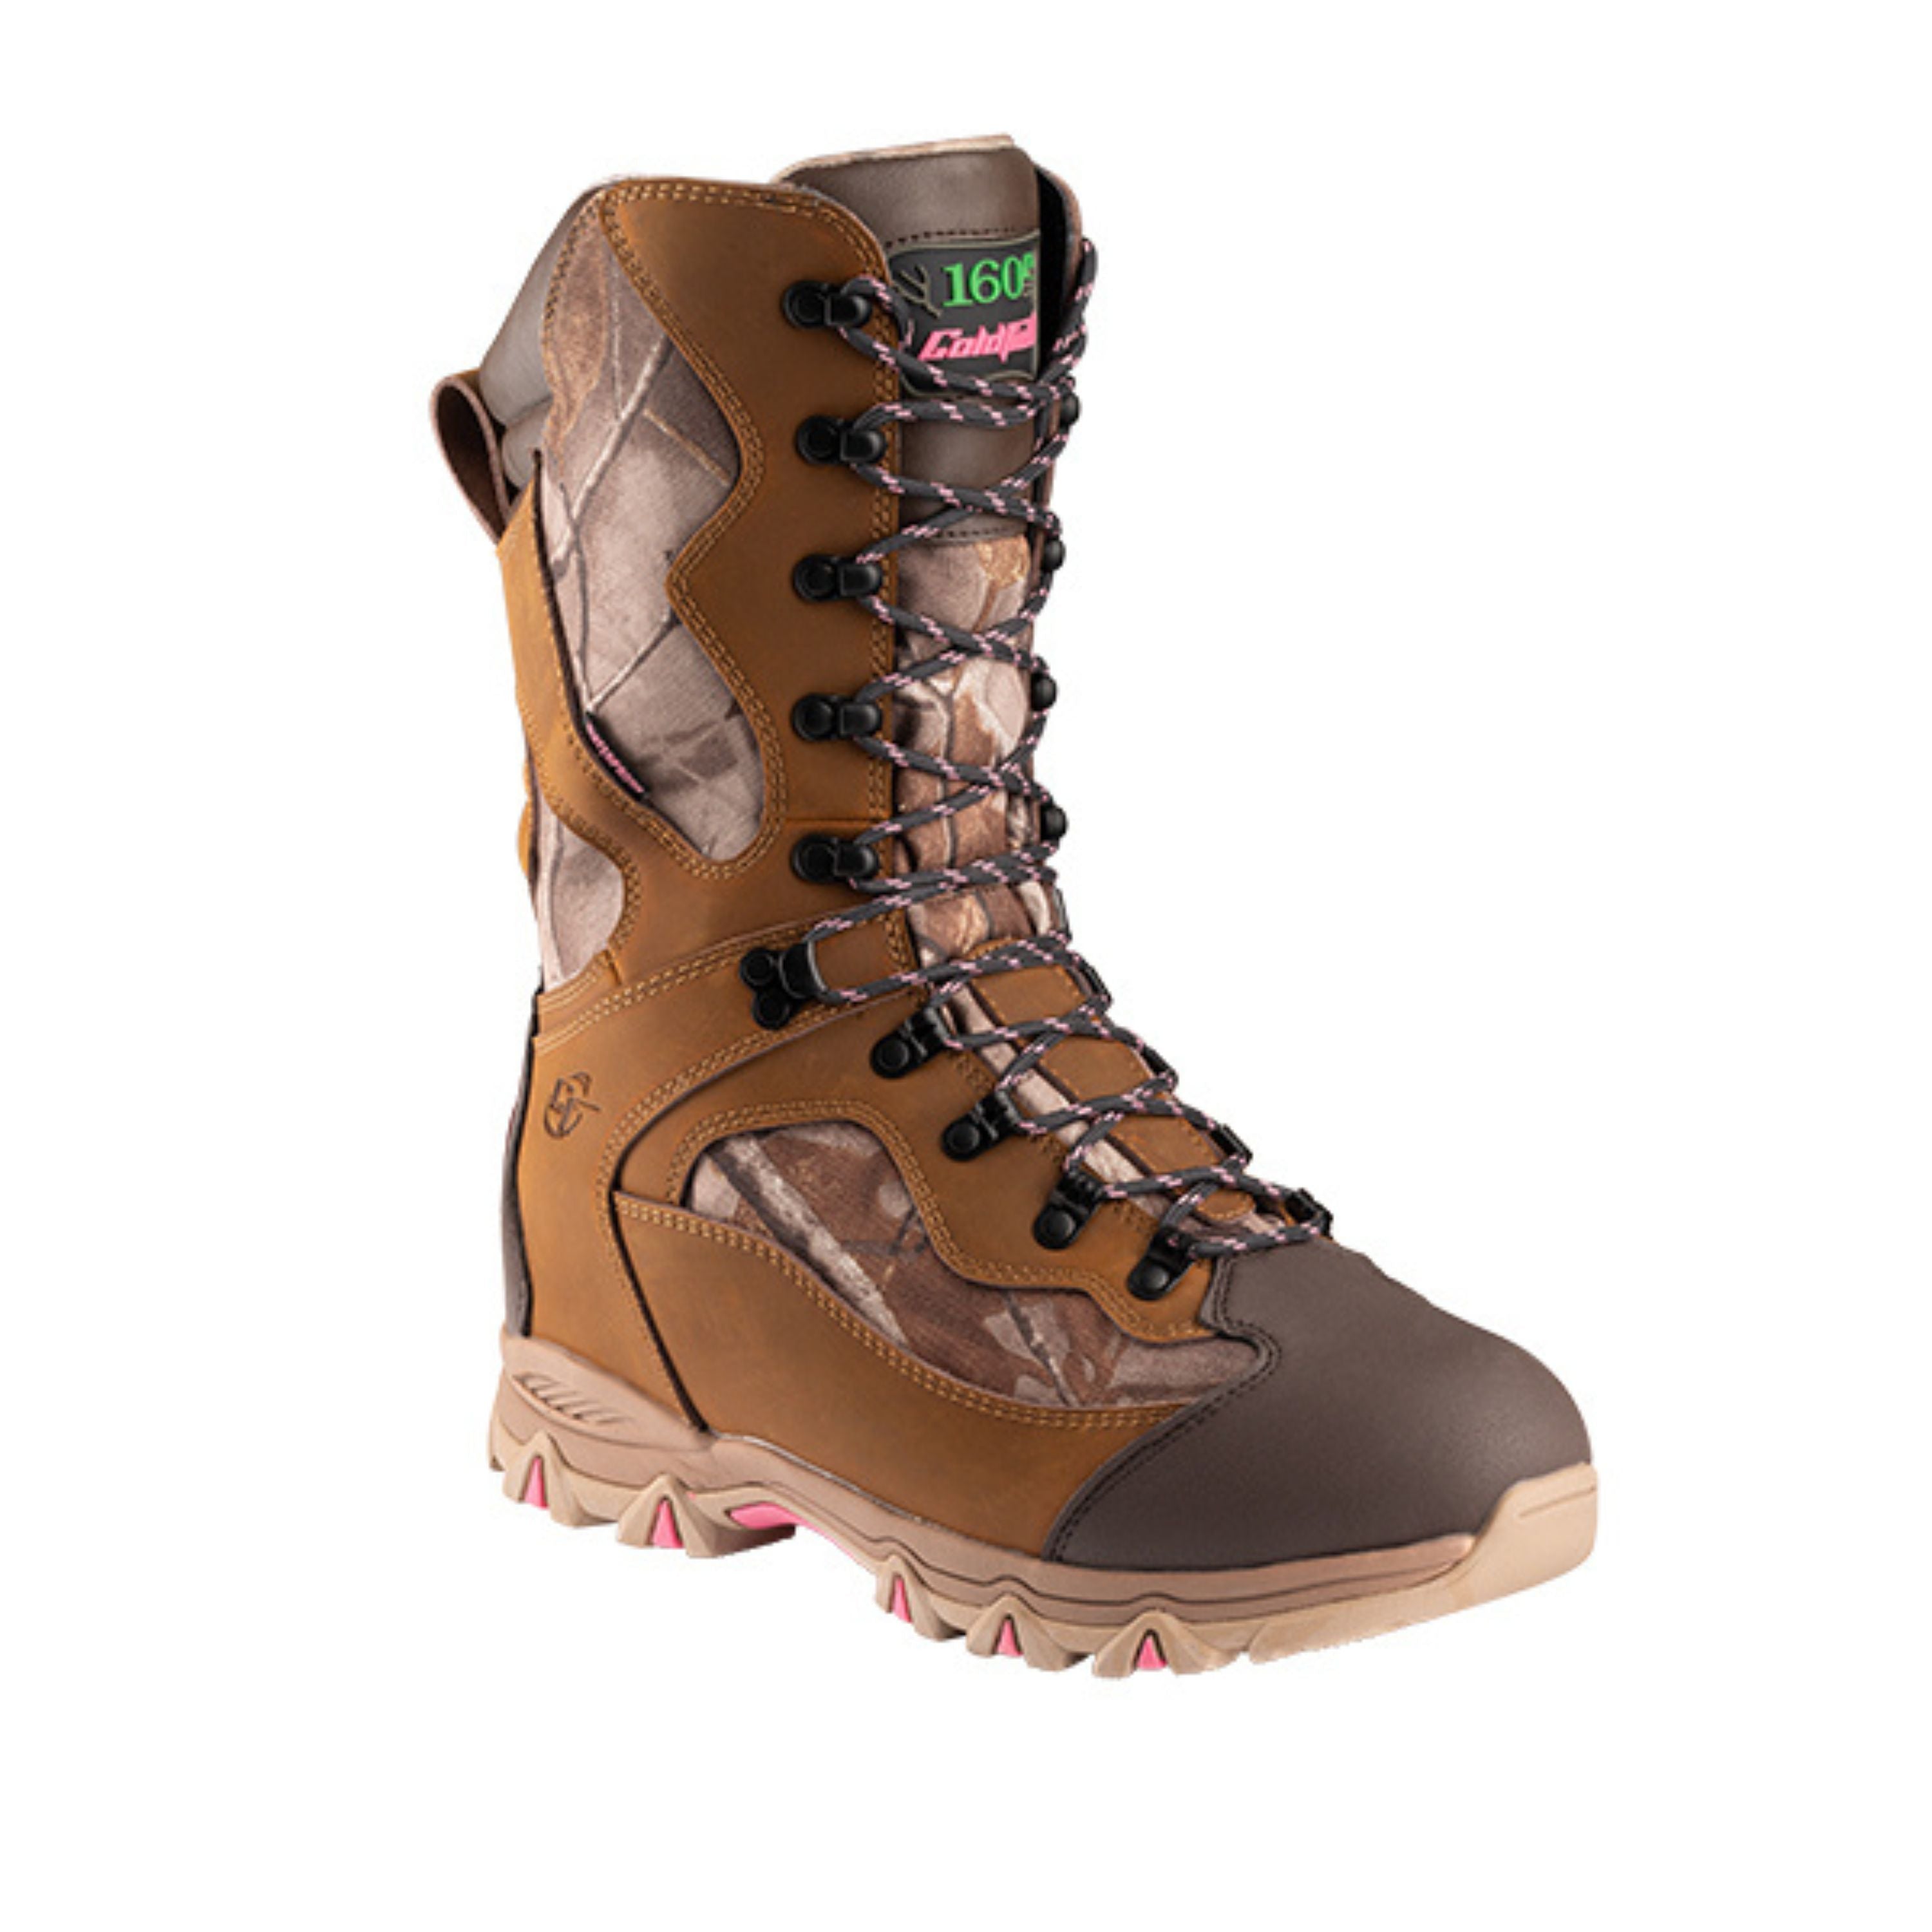 "Grizzly" Boots - Women's